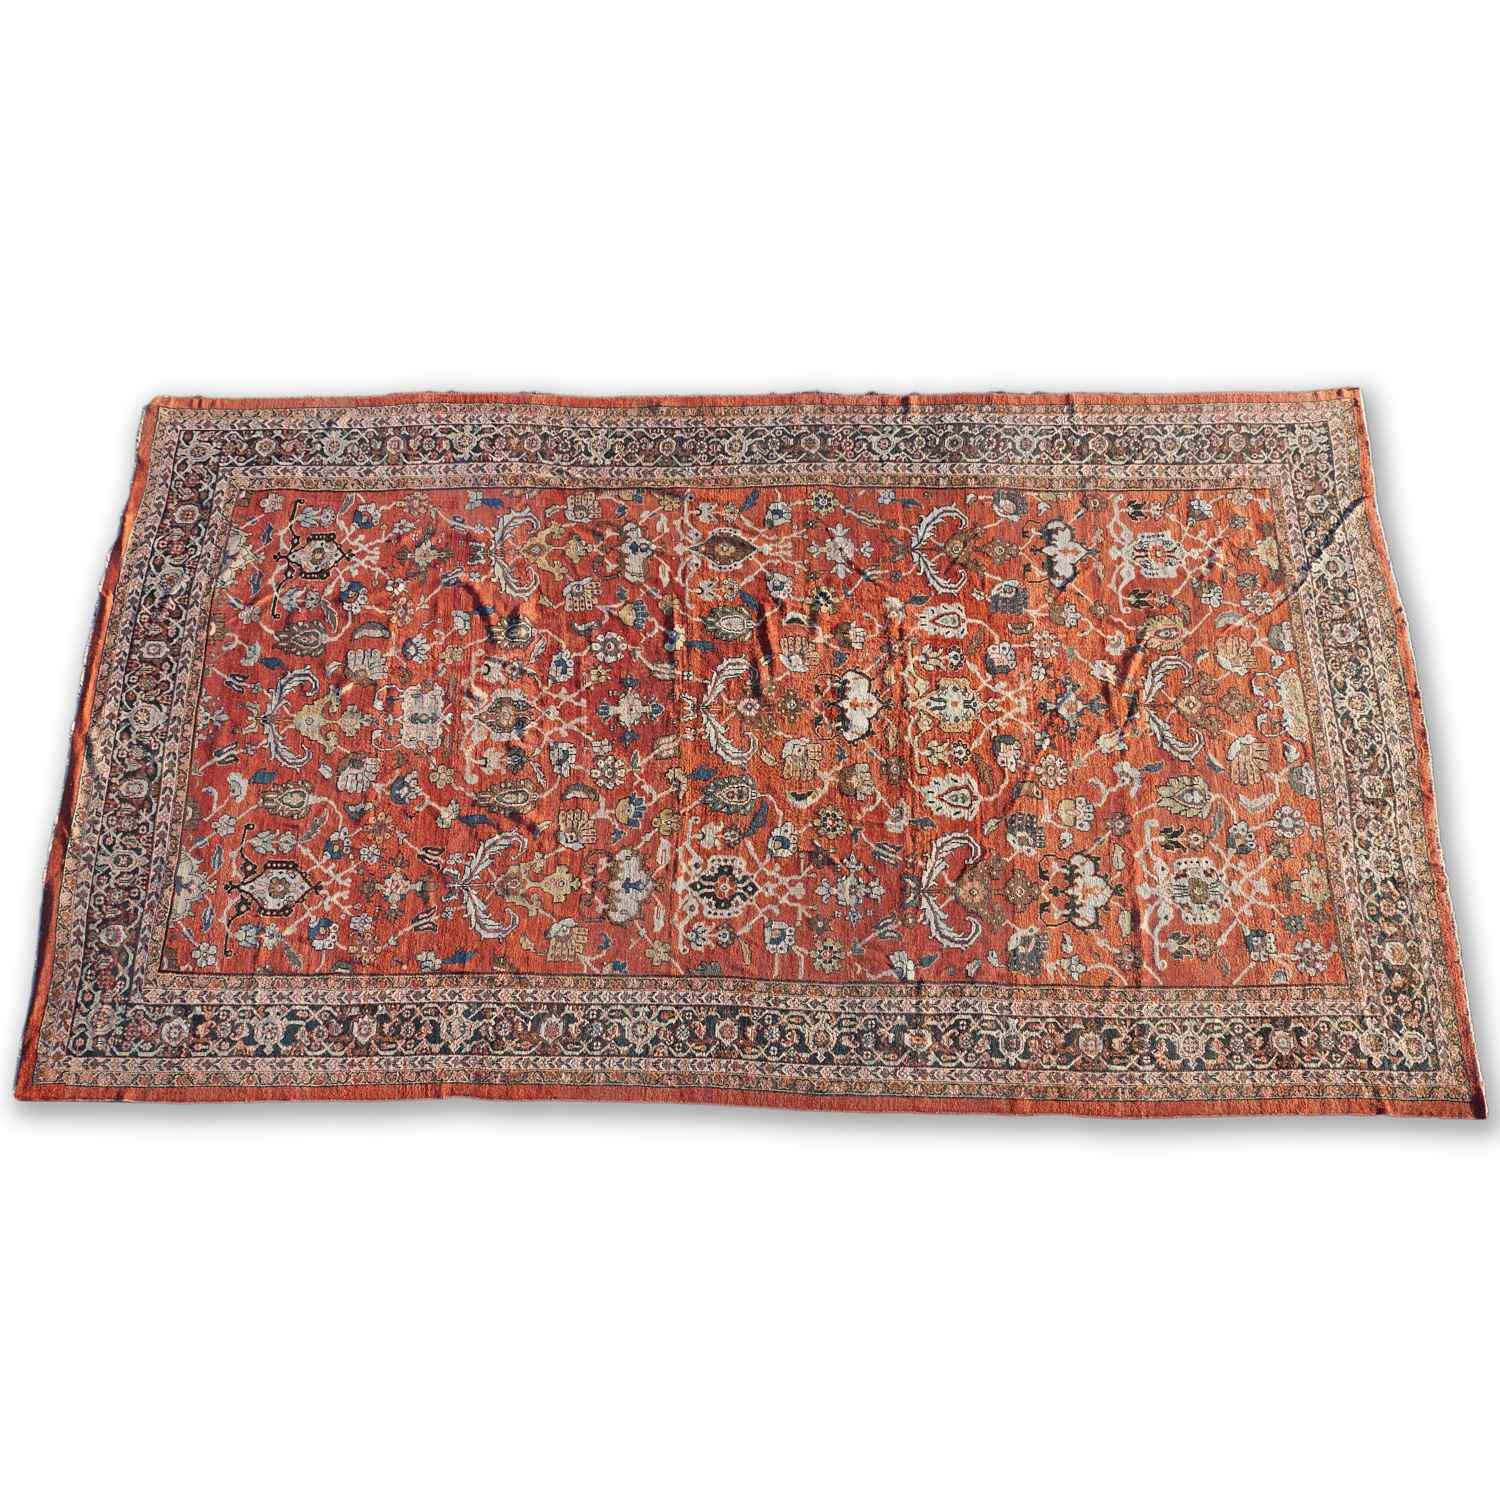 ROOM SIZE PERSIAN CARPET first